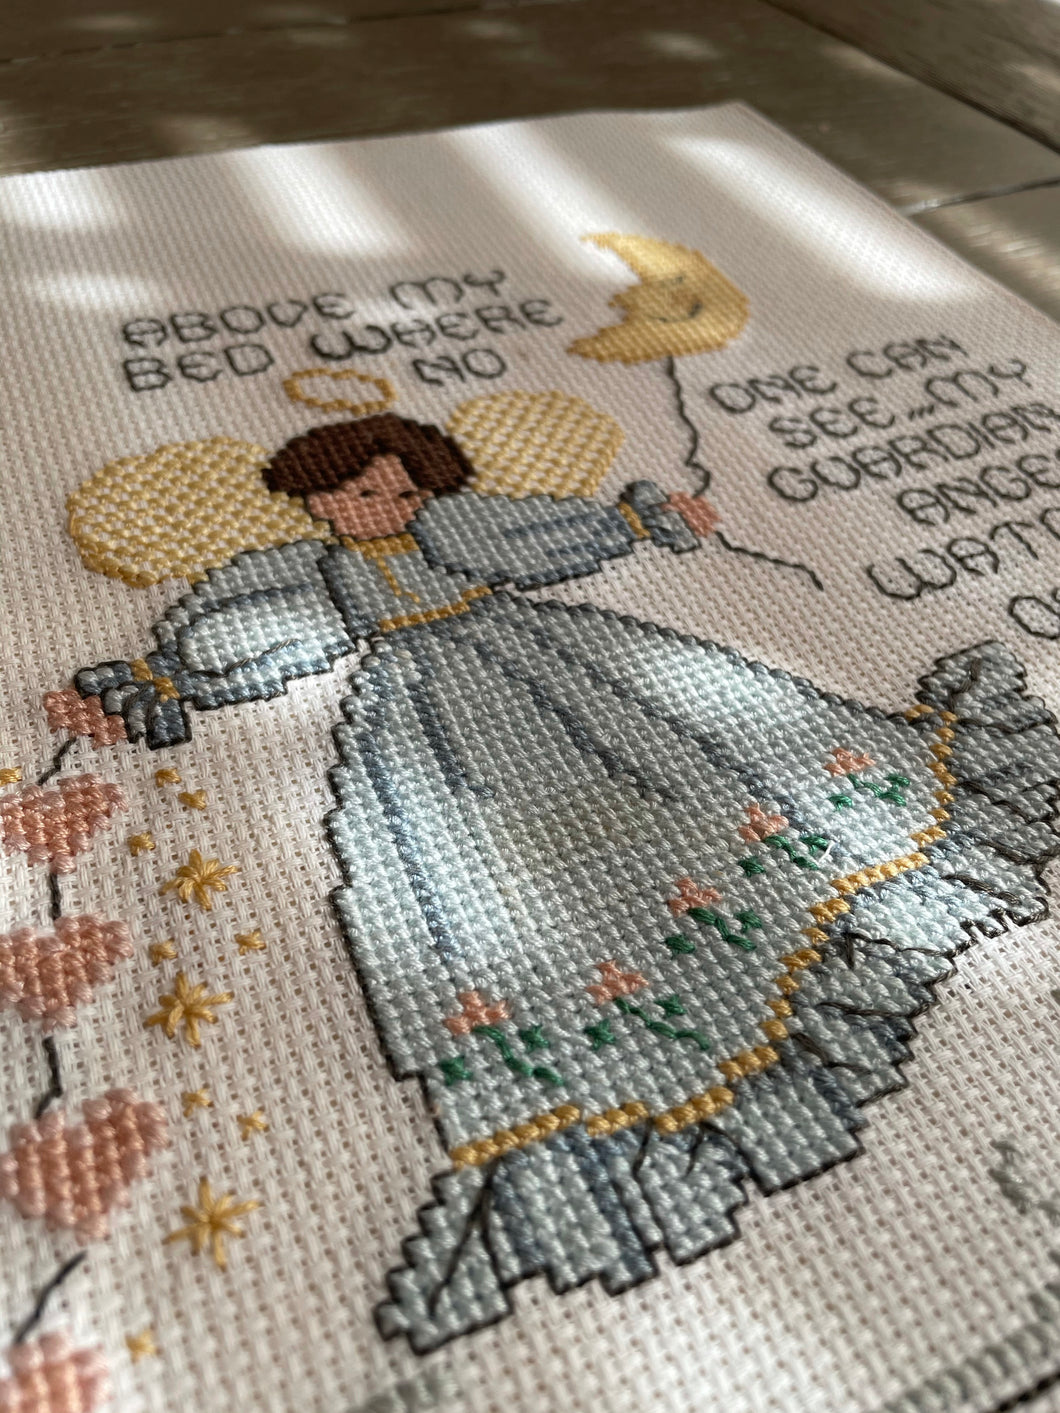 Completed Children’s Room Cross Stitch